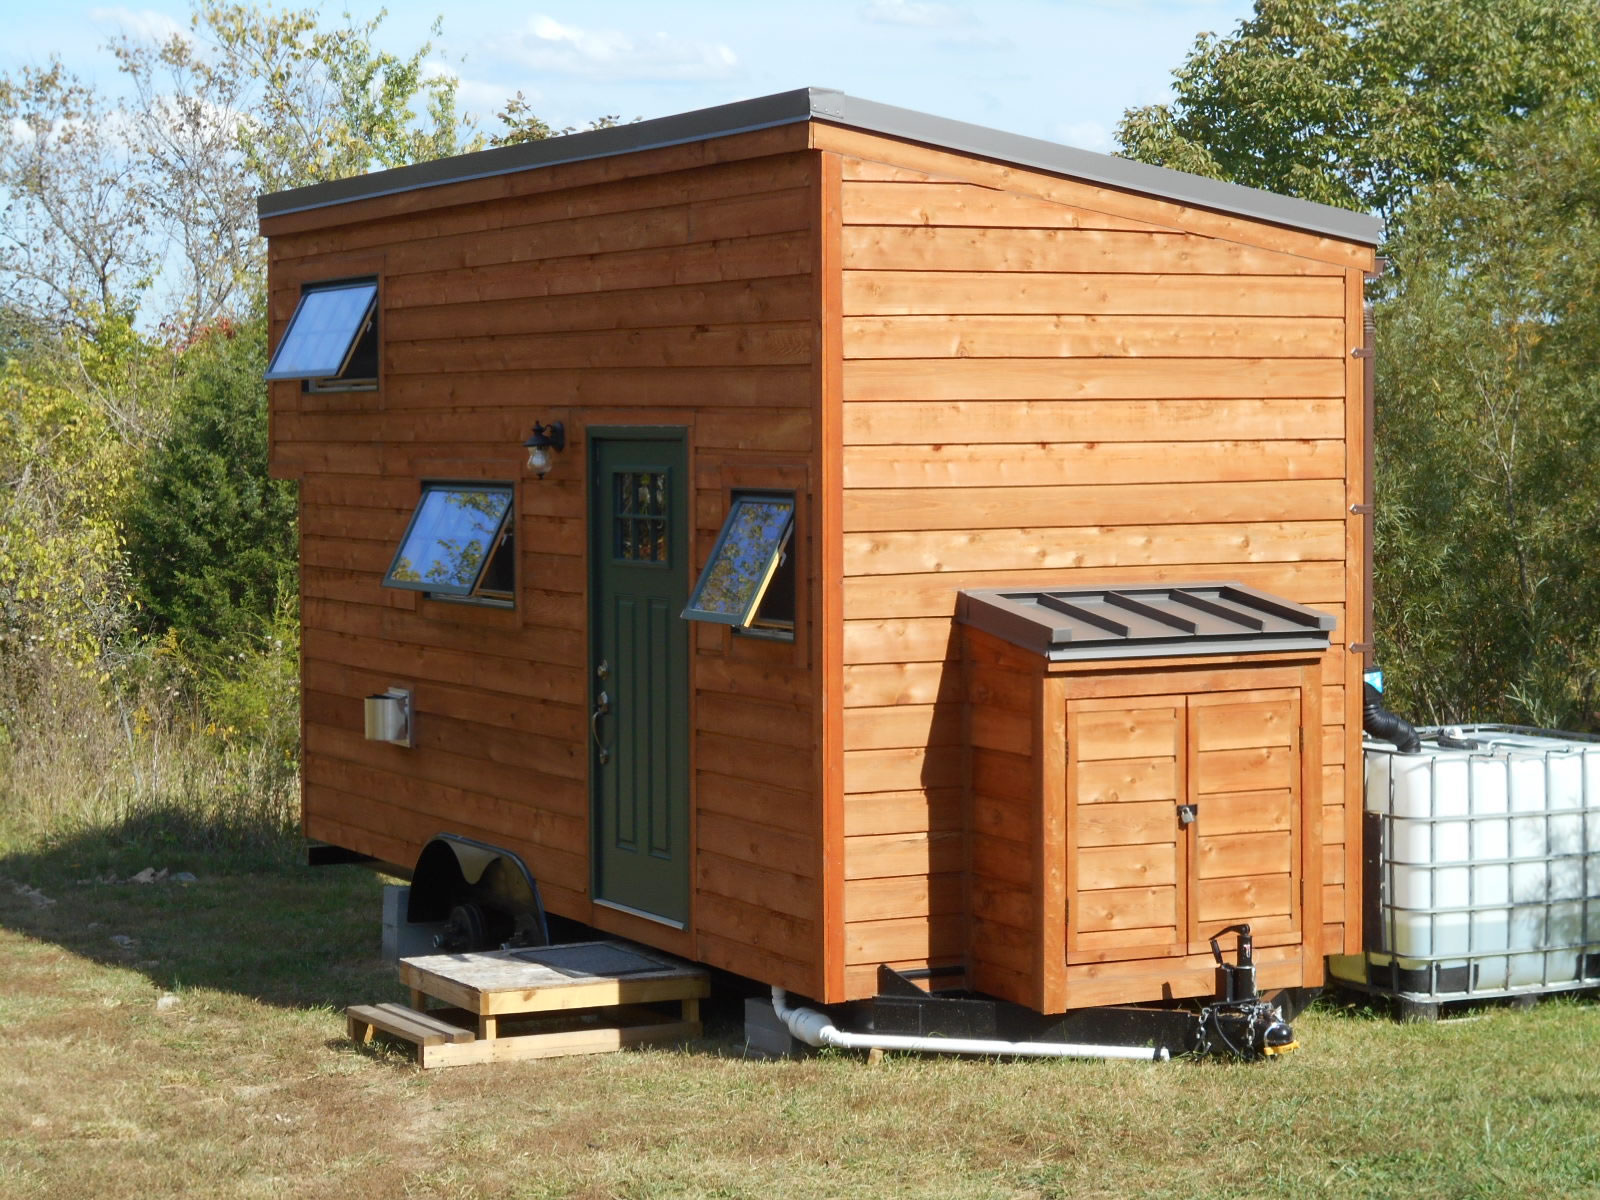 Mike Lives Virtually Free in His Tiny House